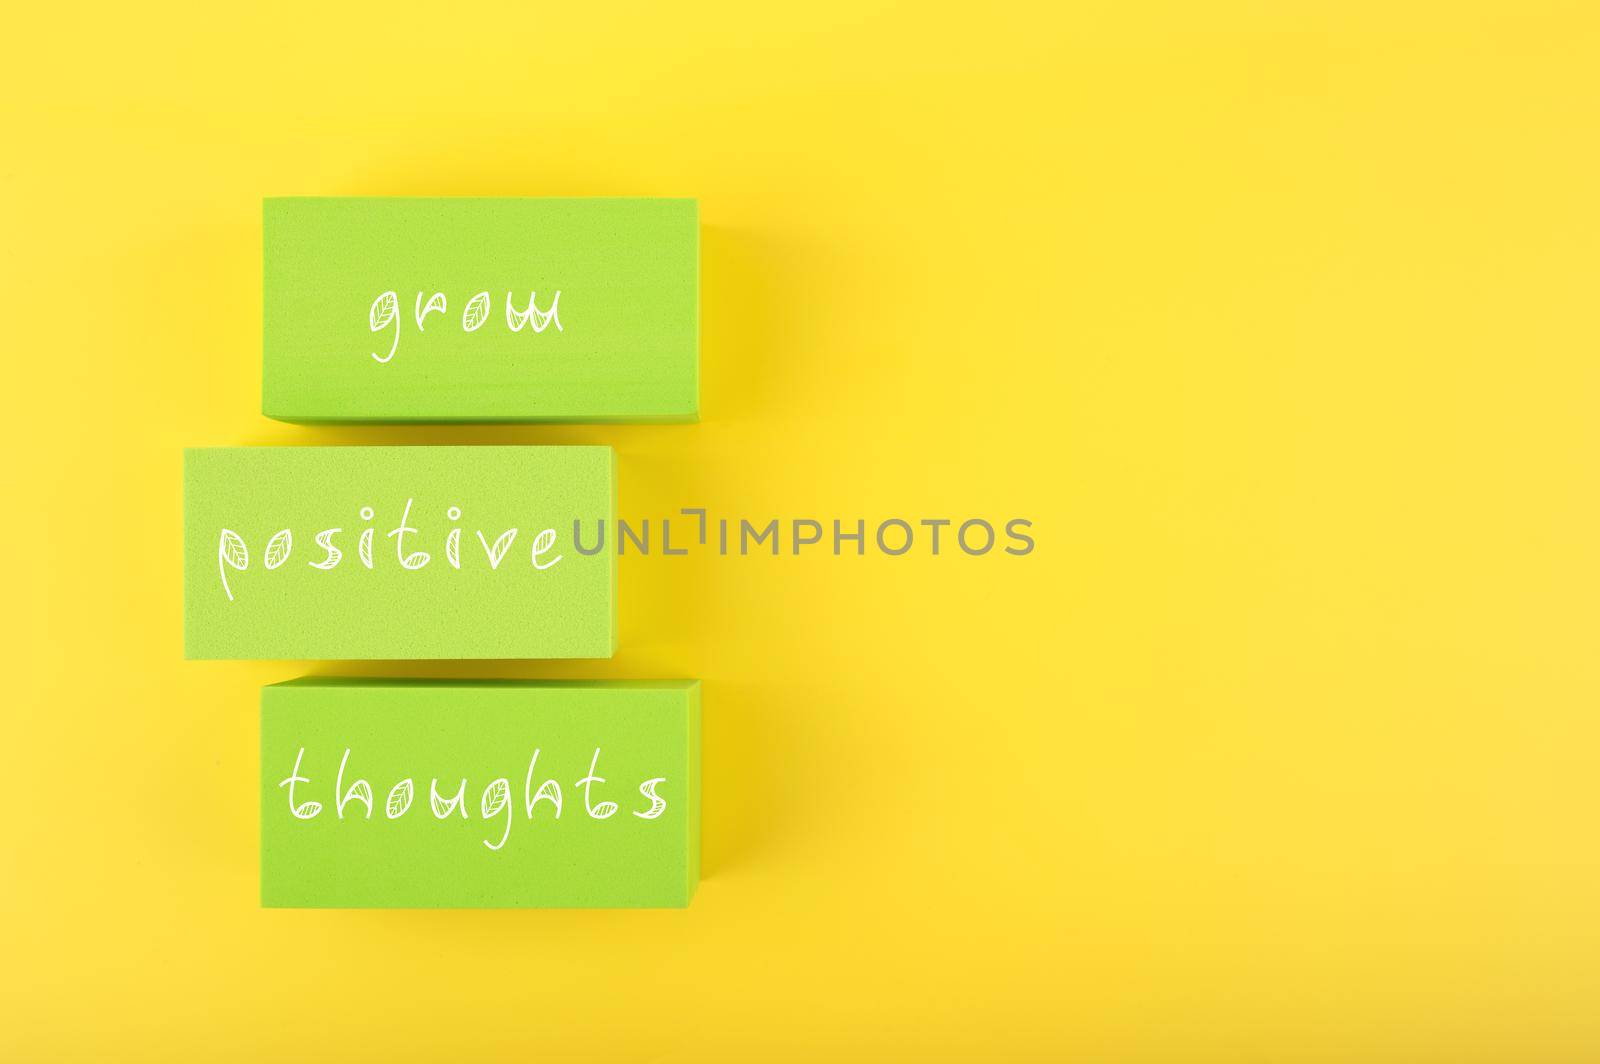 Positive affirmation, mental health or quote concept. Grow positive thoughts written on green rectangles on yellow background with copy space. Motivational text for inner piece